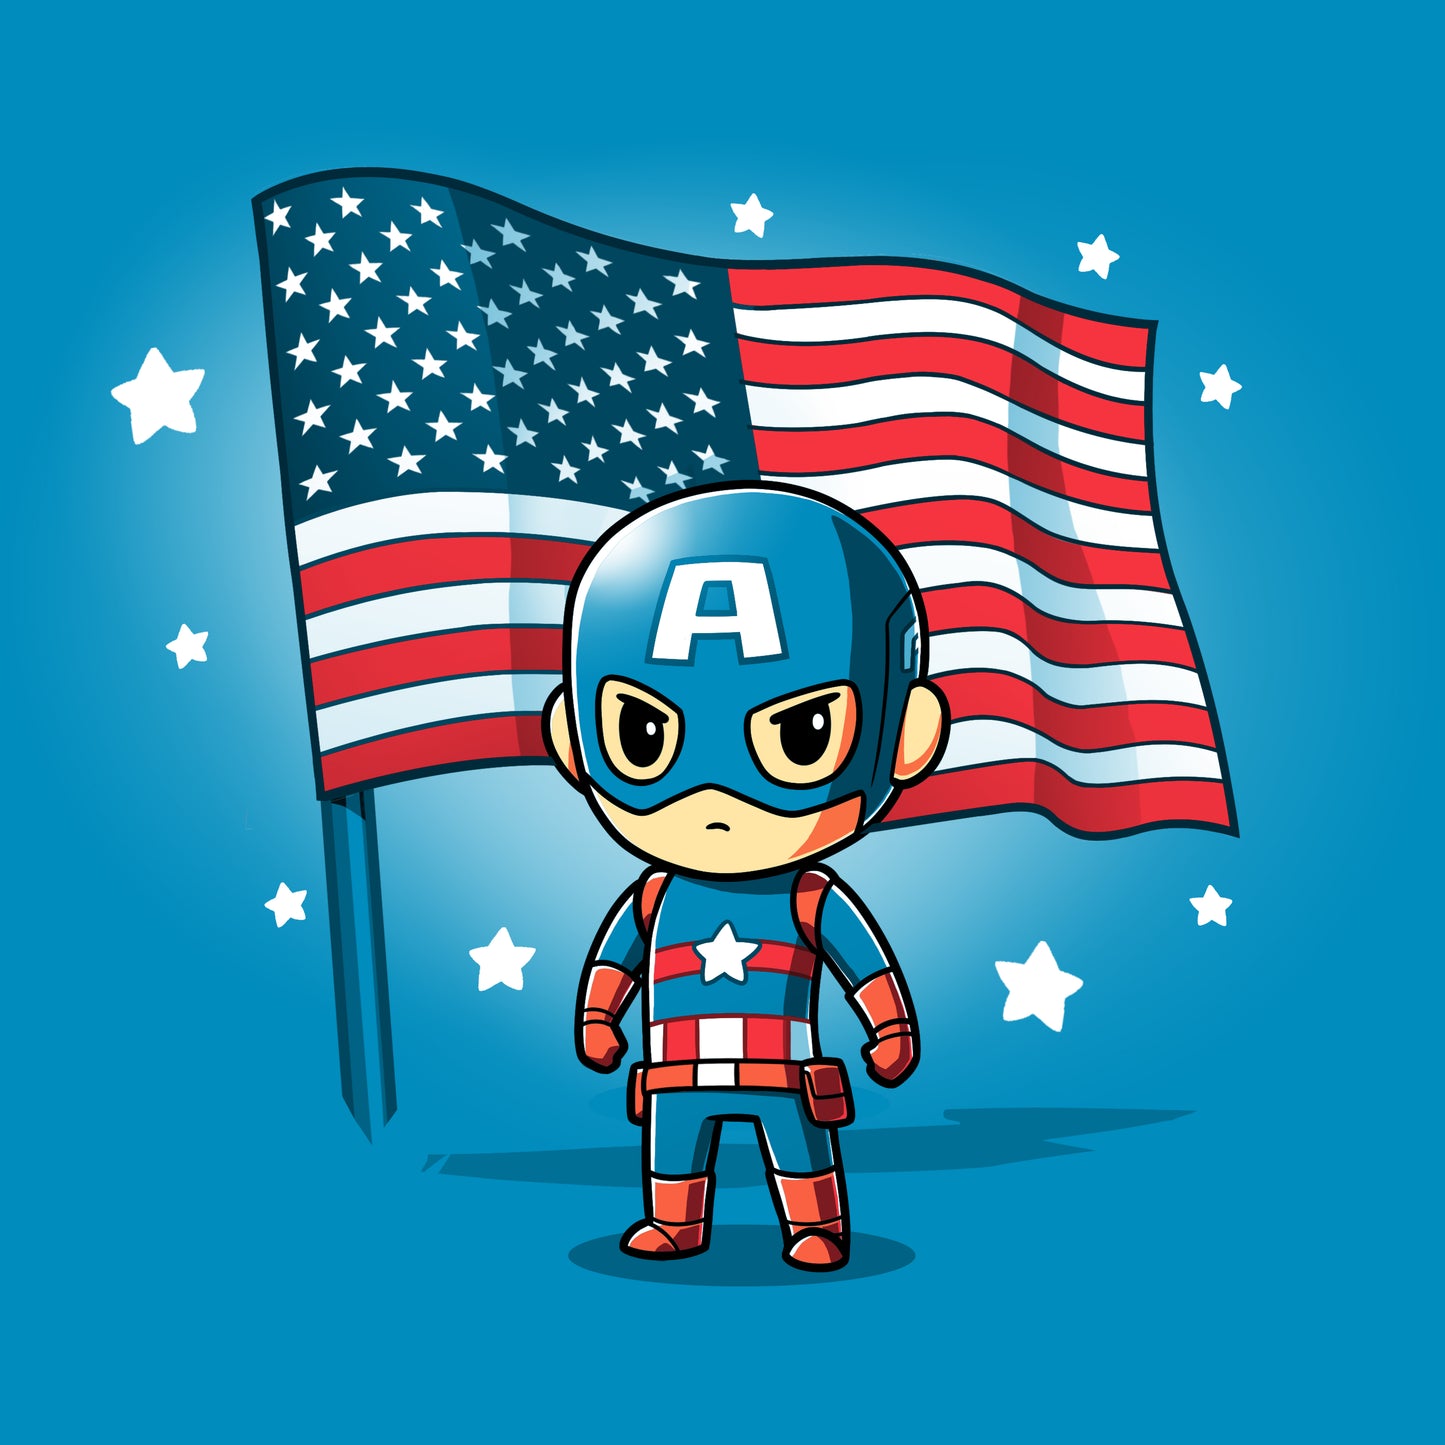 A cartoon Marvel Captain America, authorized and officially licensed, proudly stands next to an American flag.